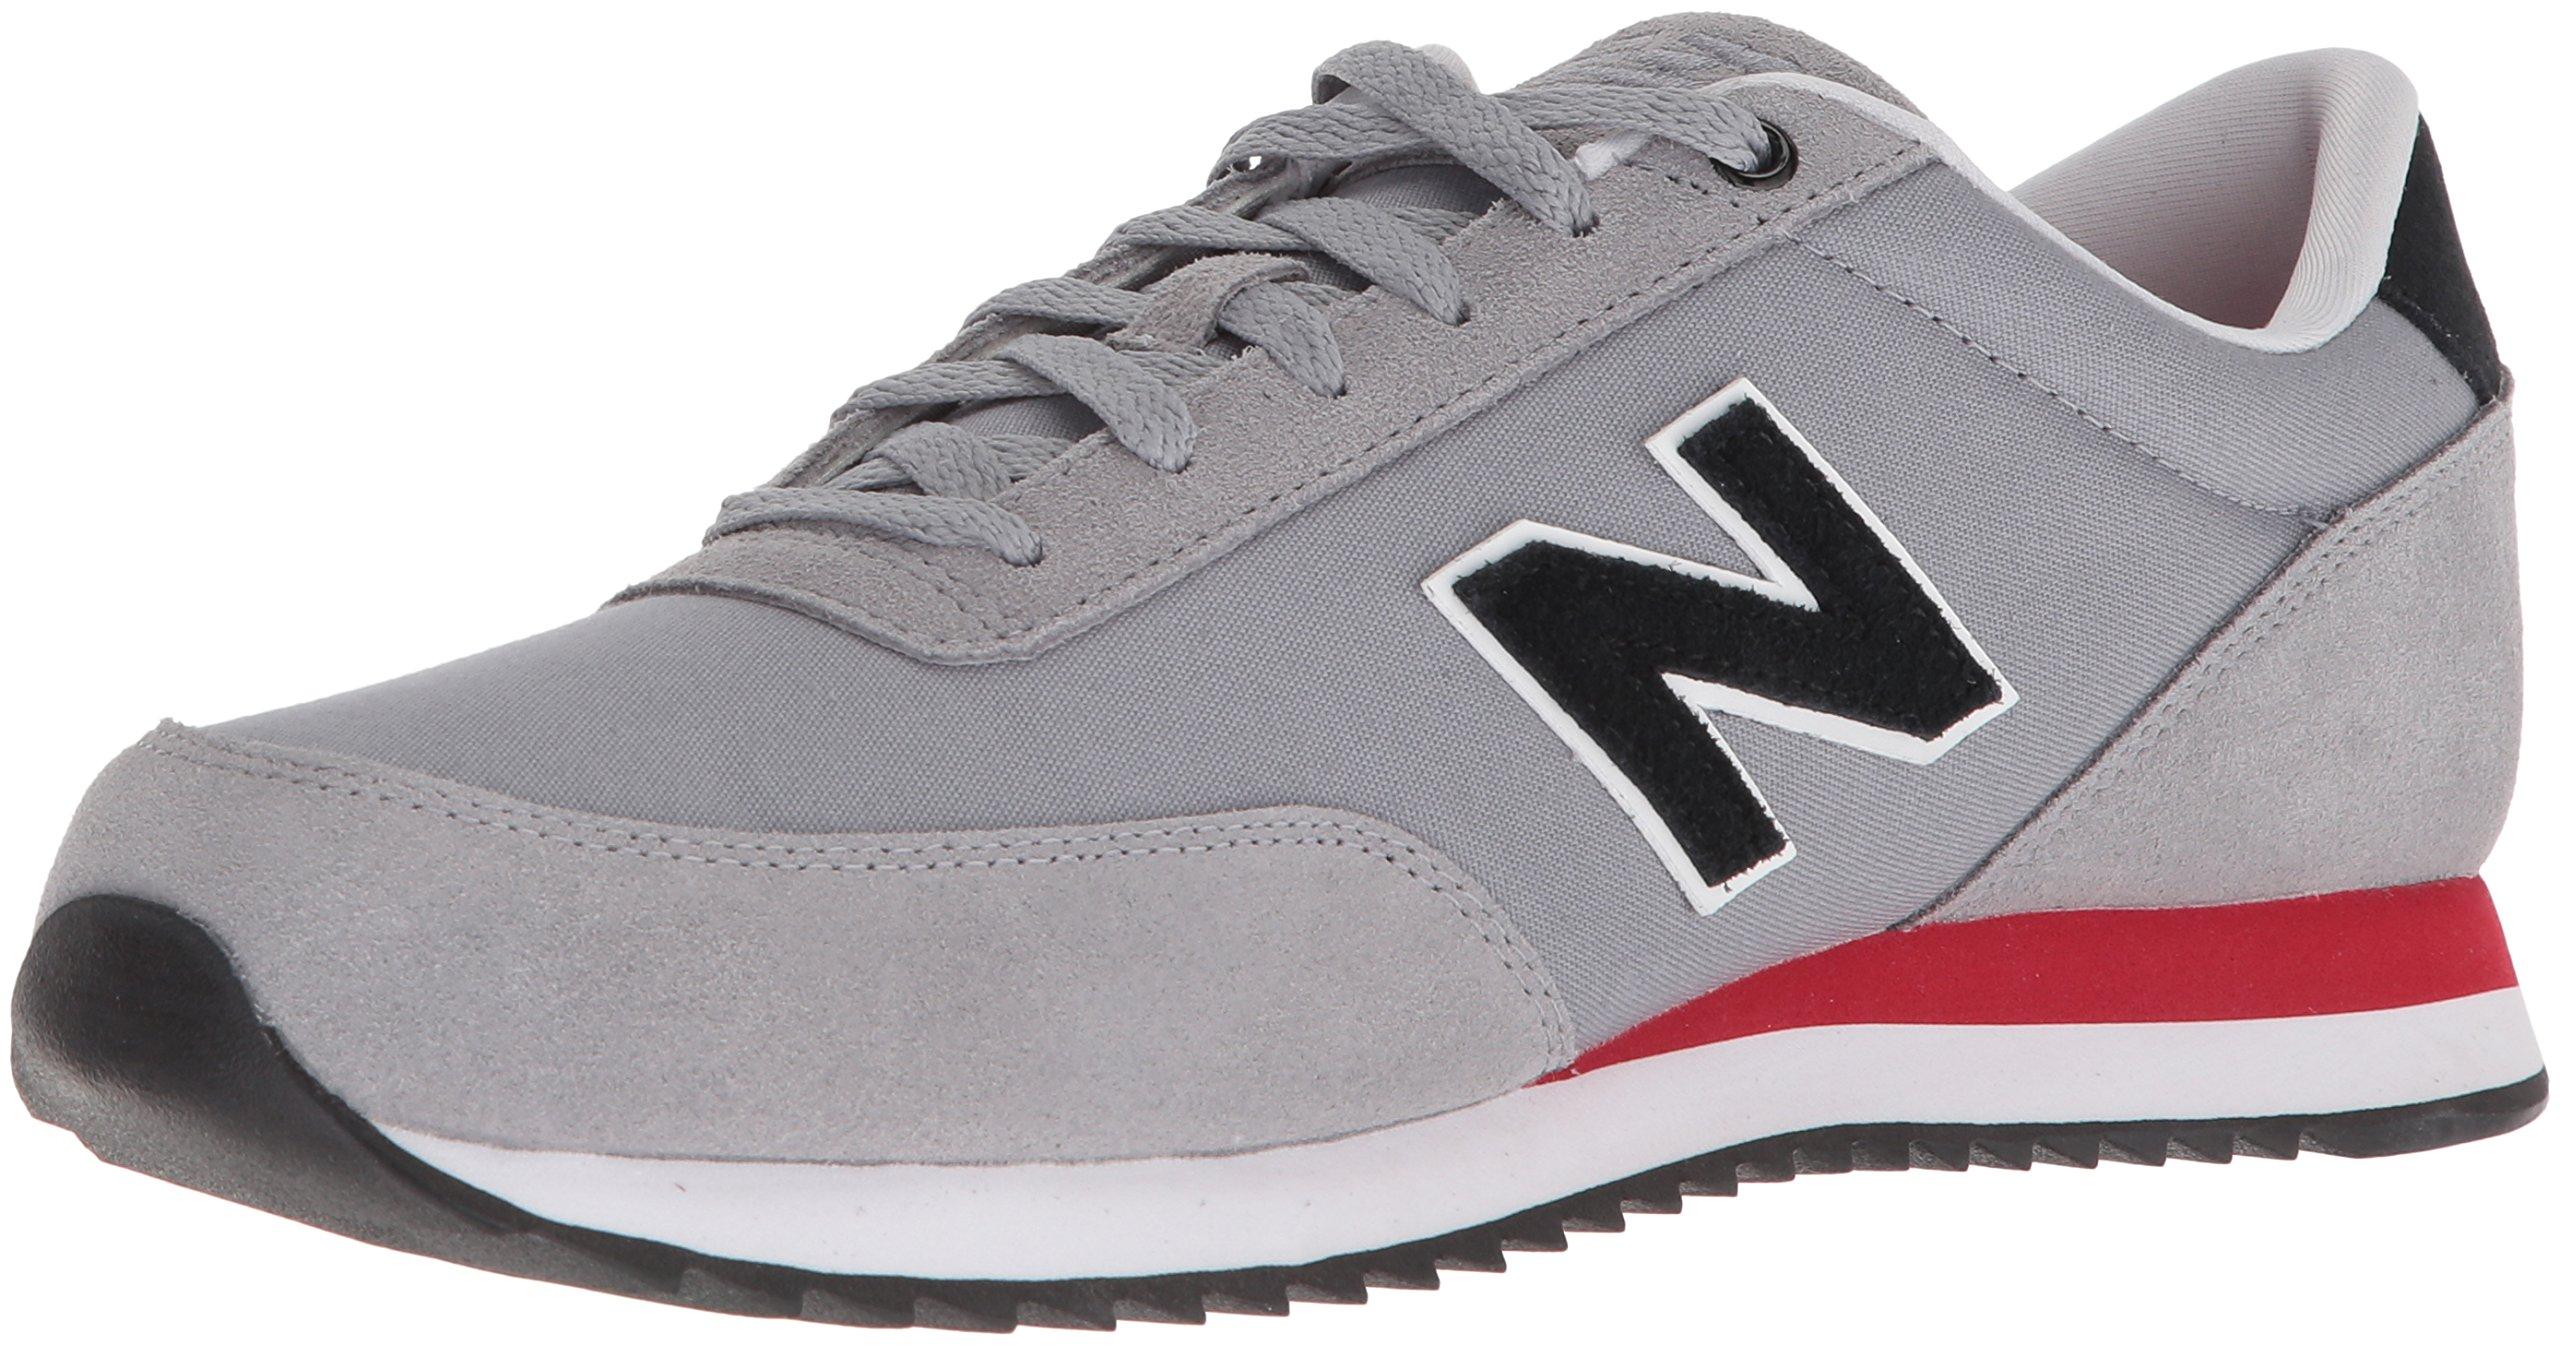 New Balance Synthetic 501 Casual Sneakers From Finish Line in Grey/Navy/Red  (Gray) for Men - Save 35% - Lyst